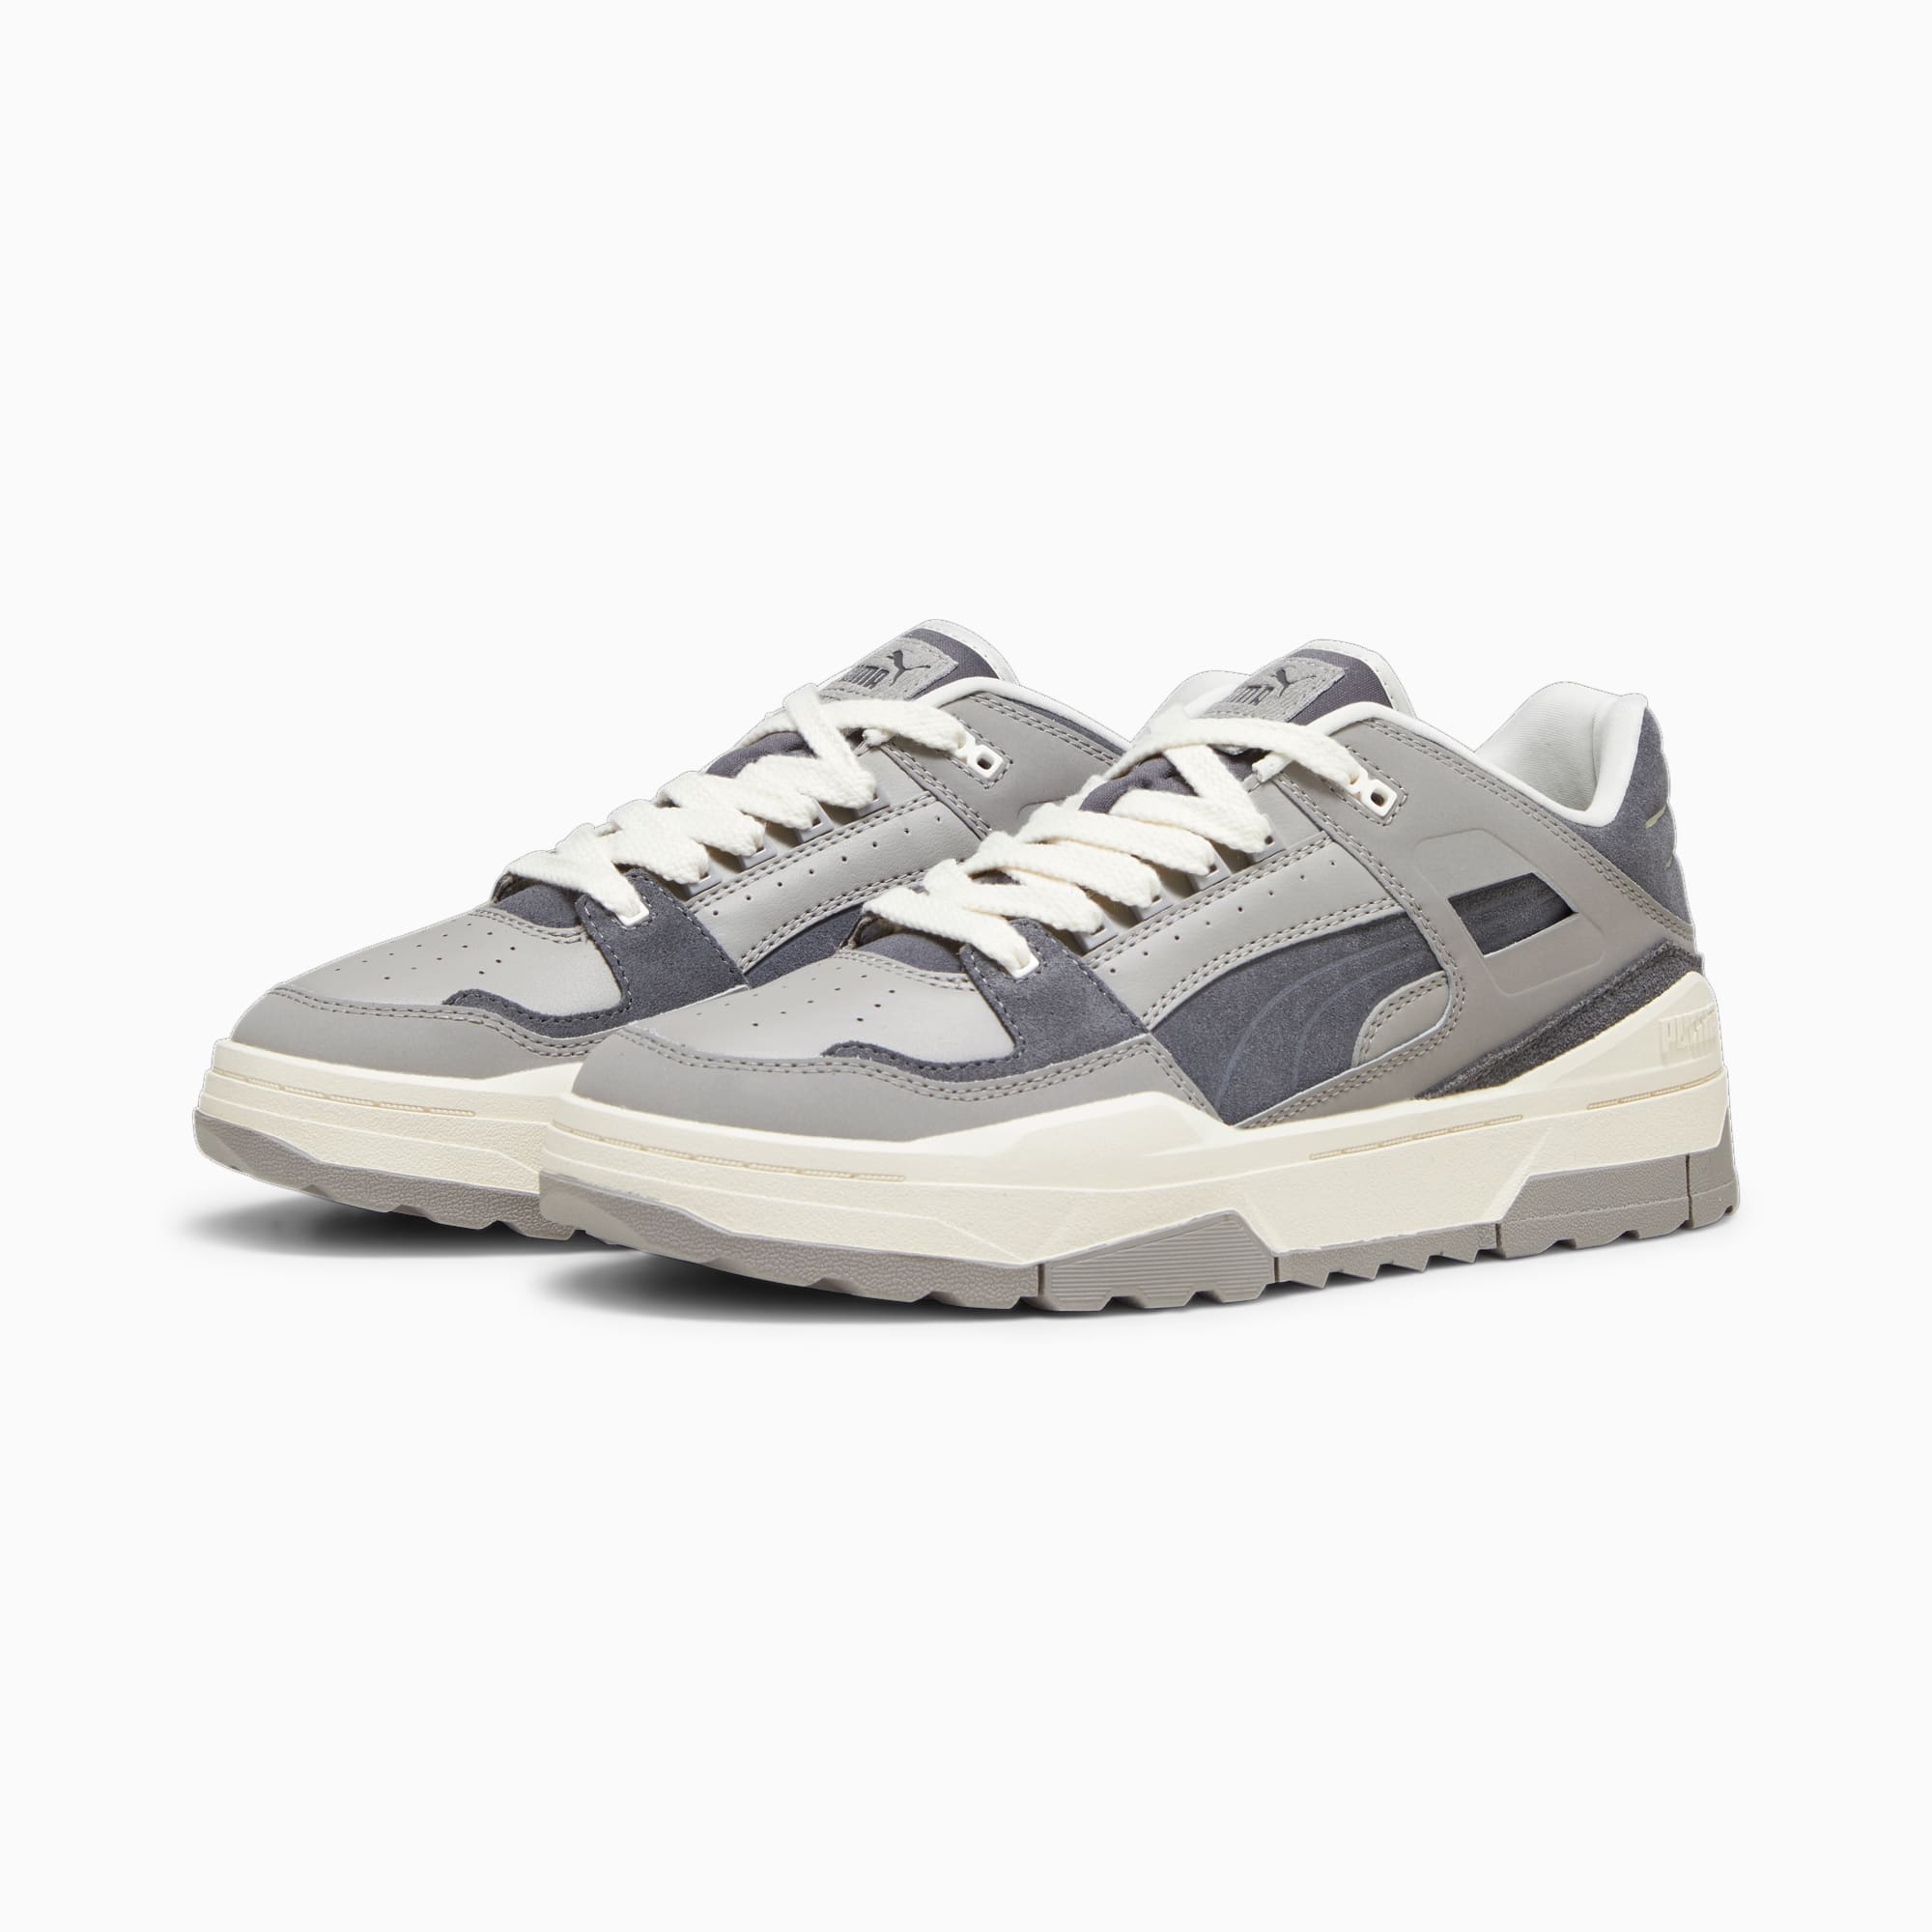 PUMA Chaussure Sneakers Slipstream Xtreme, Gris